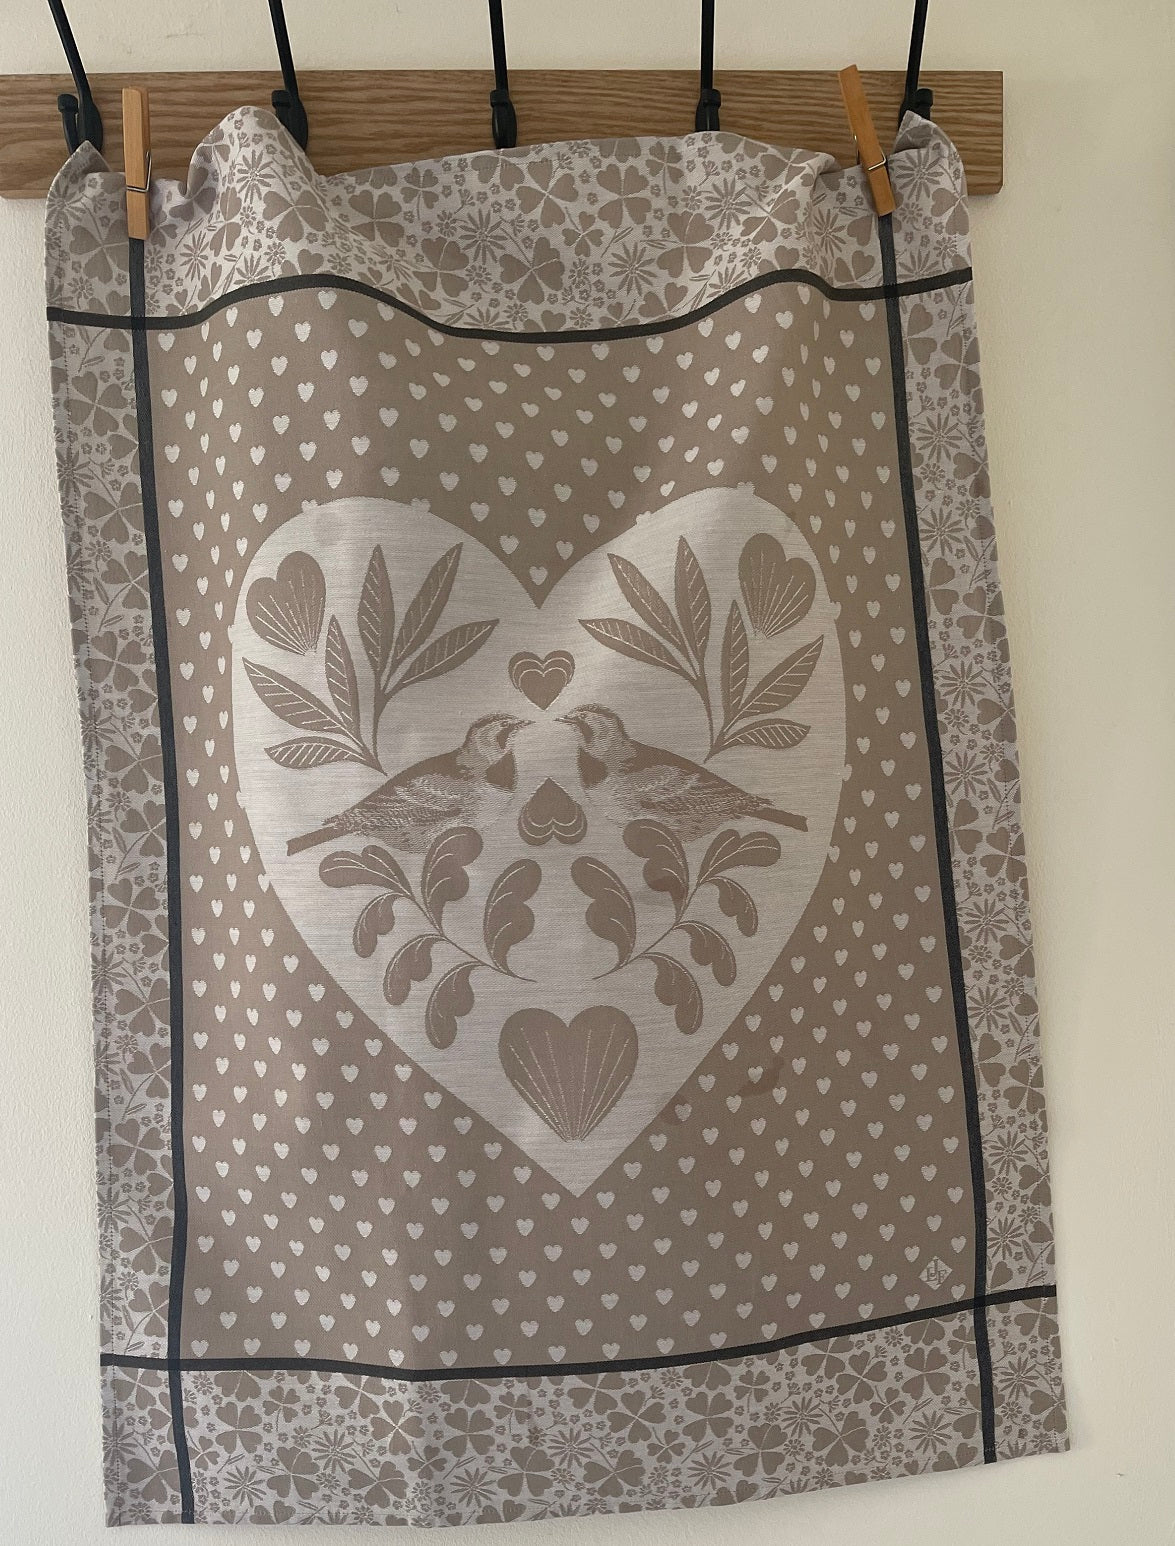 Jacquard Francais "Amour" (Beige), Woven cotton tea towel. Made in France.